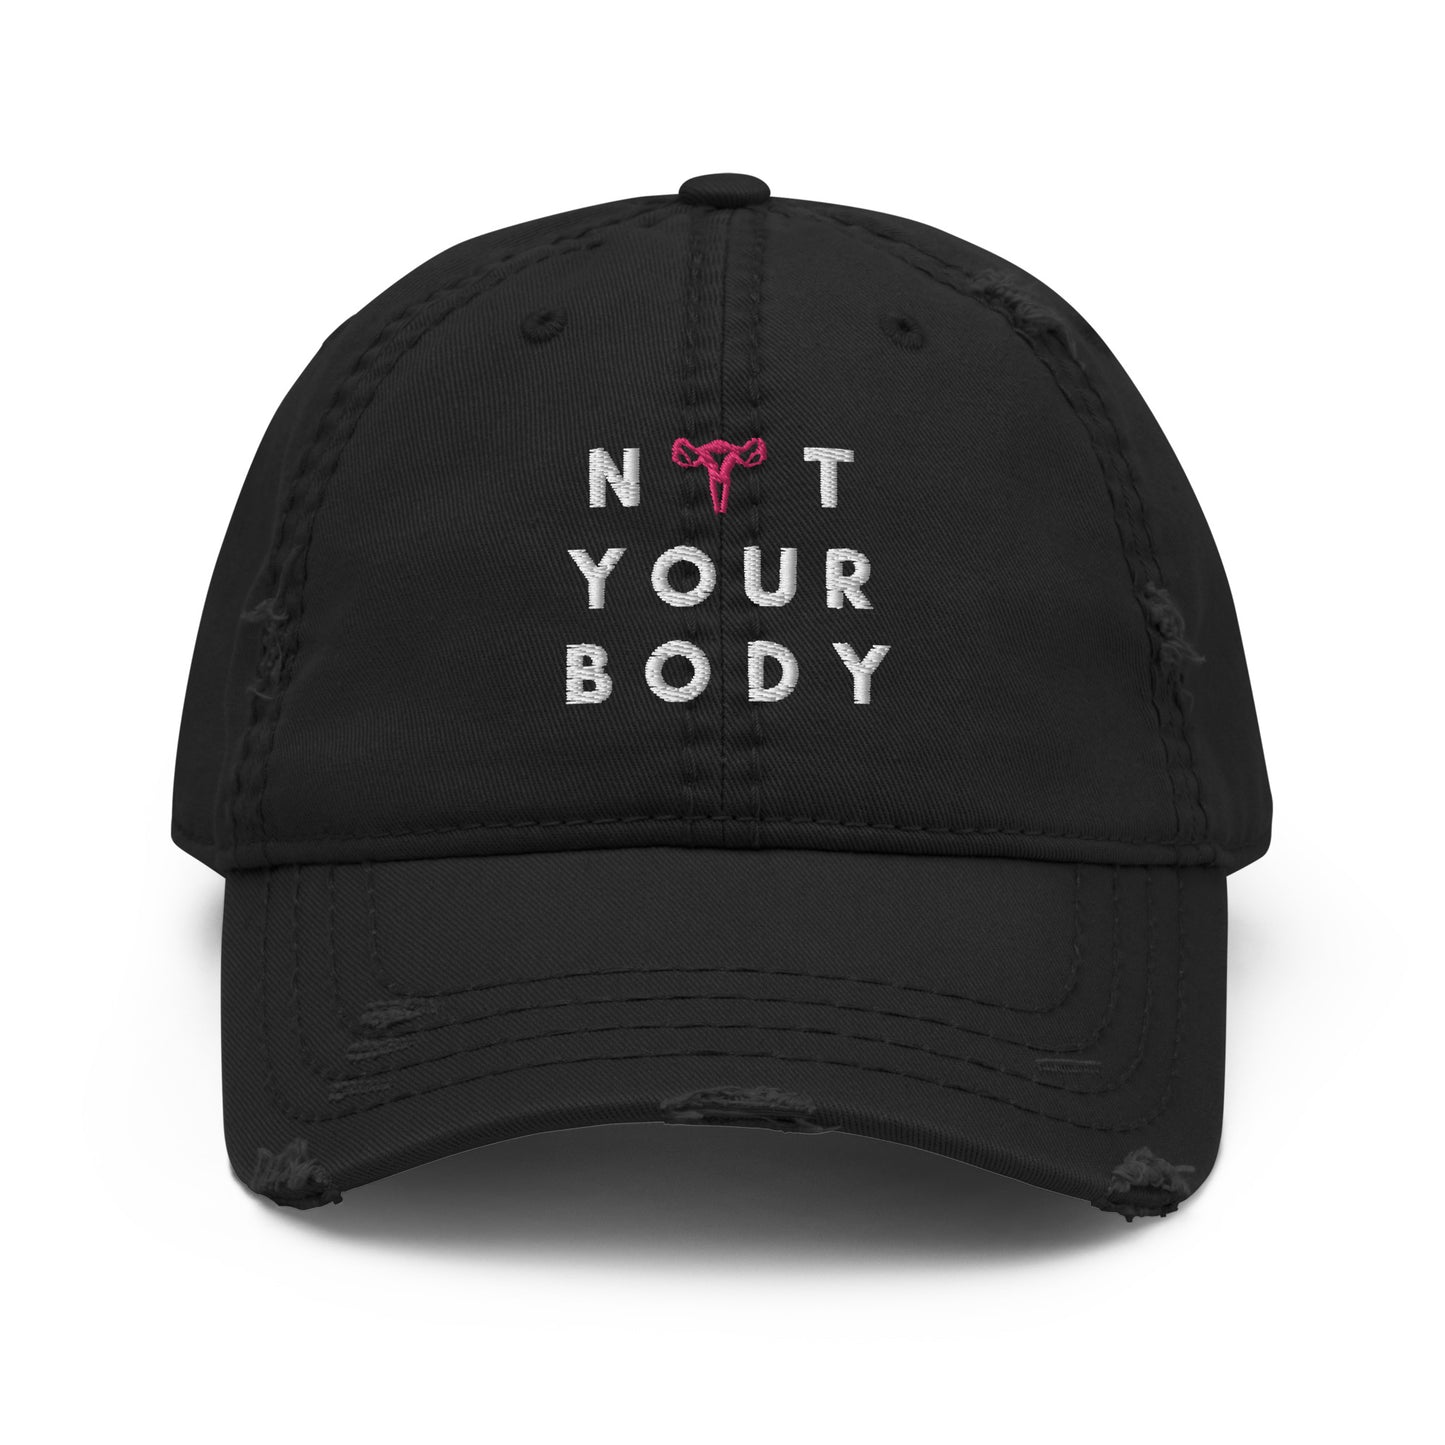 Not Your Body Distressed Hat